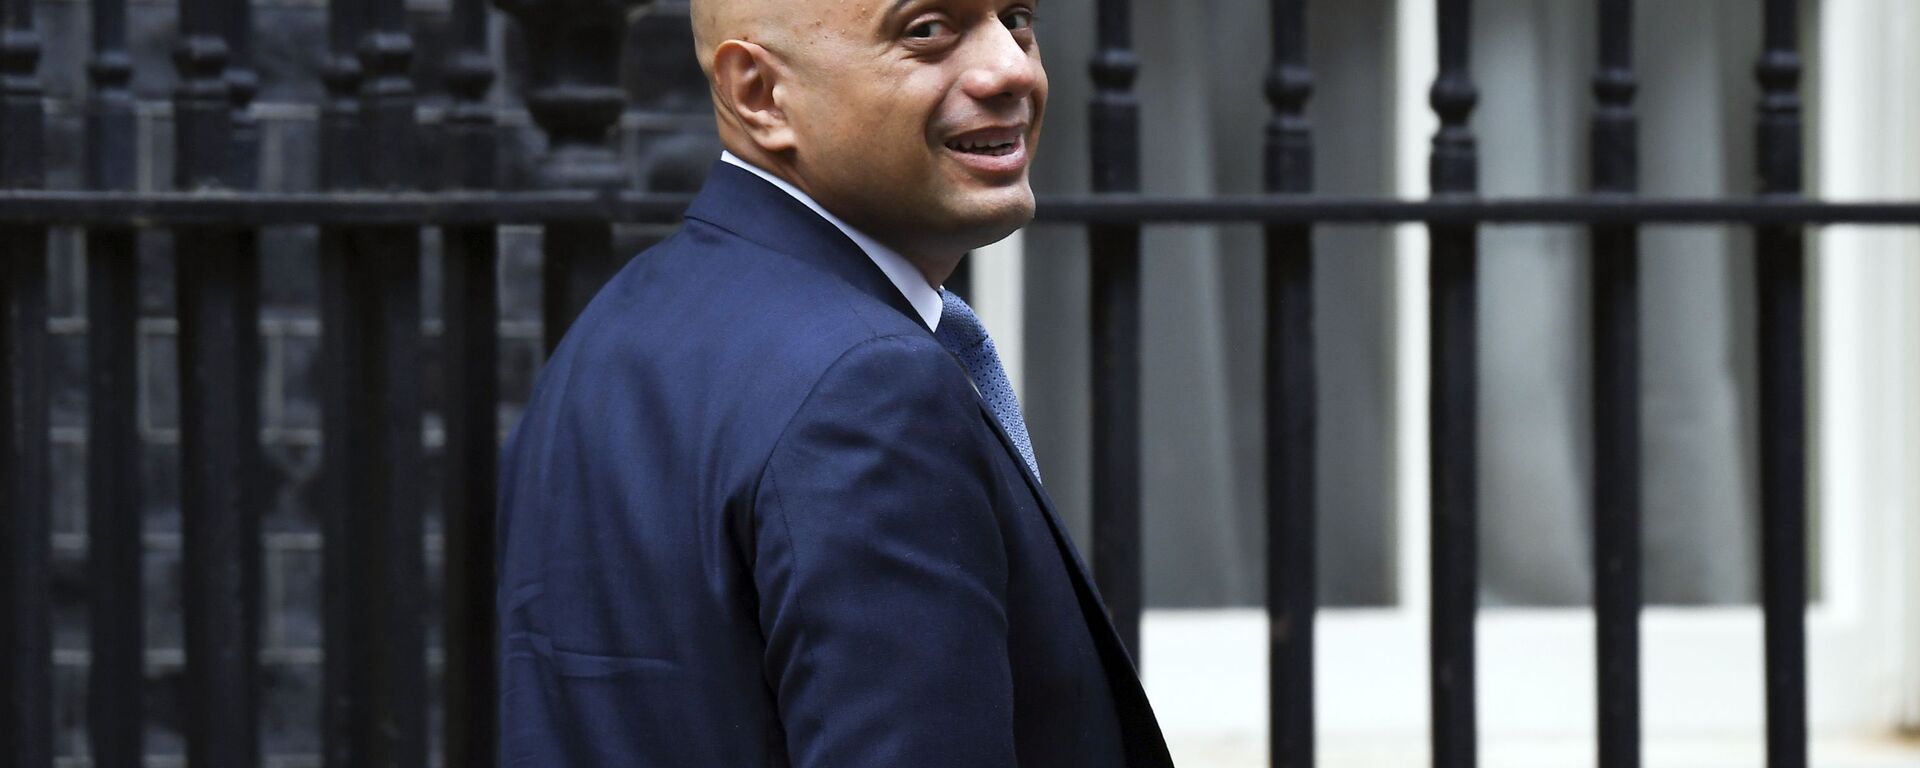 British Chancellor of the Exchequer Sajid Javid leaves11 Downing Street in London, Wednesday, Sept. 4, 2019 - Sputnik International, 1920, 28.06.2021